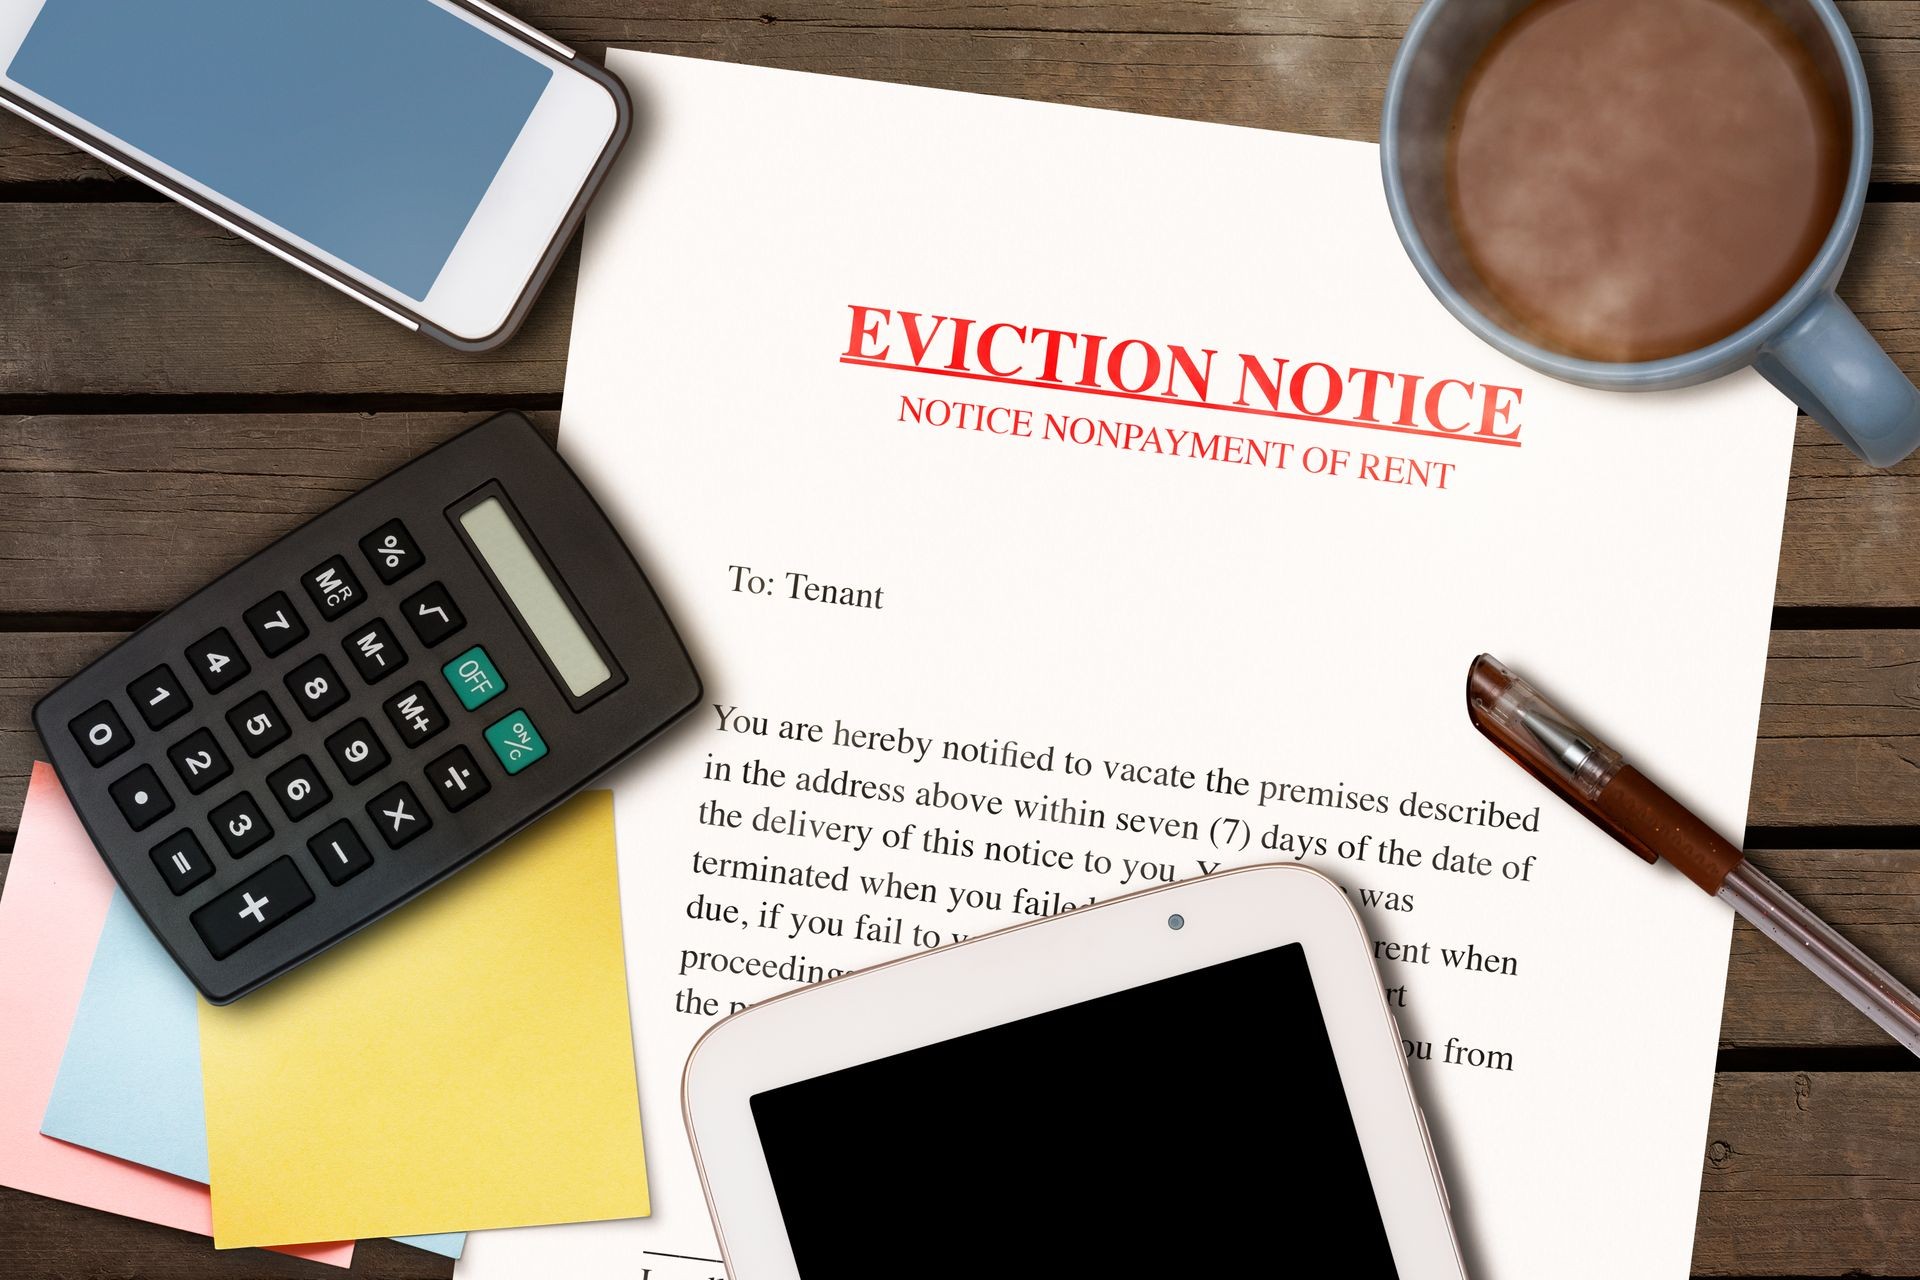 EVICTION NOTICE WITH CALCULATOR, A CUP OF COFFEE, SMARTPHONE, TABLET, PAPER NOTES AND A PEN ON WOODEN TABLE. (FINANCIAL DIFFICULTY CONCEPT)